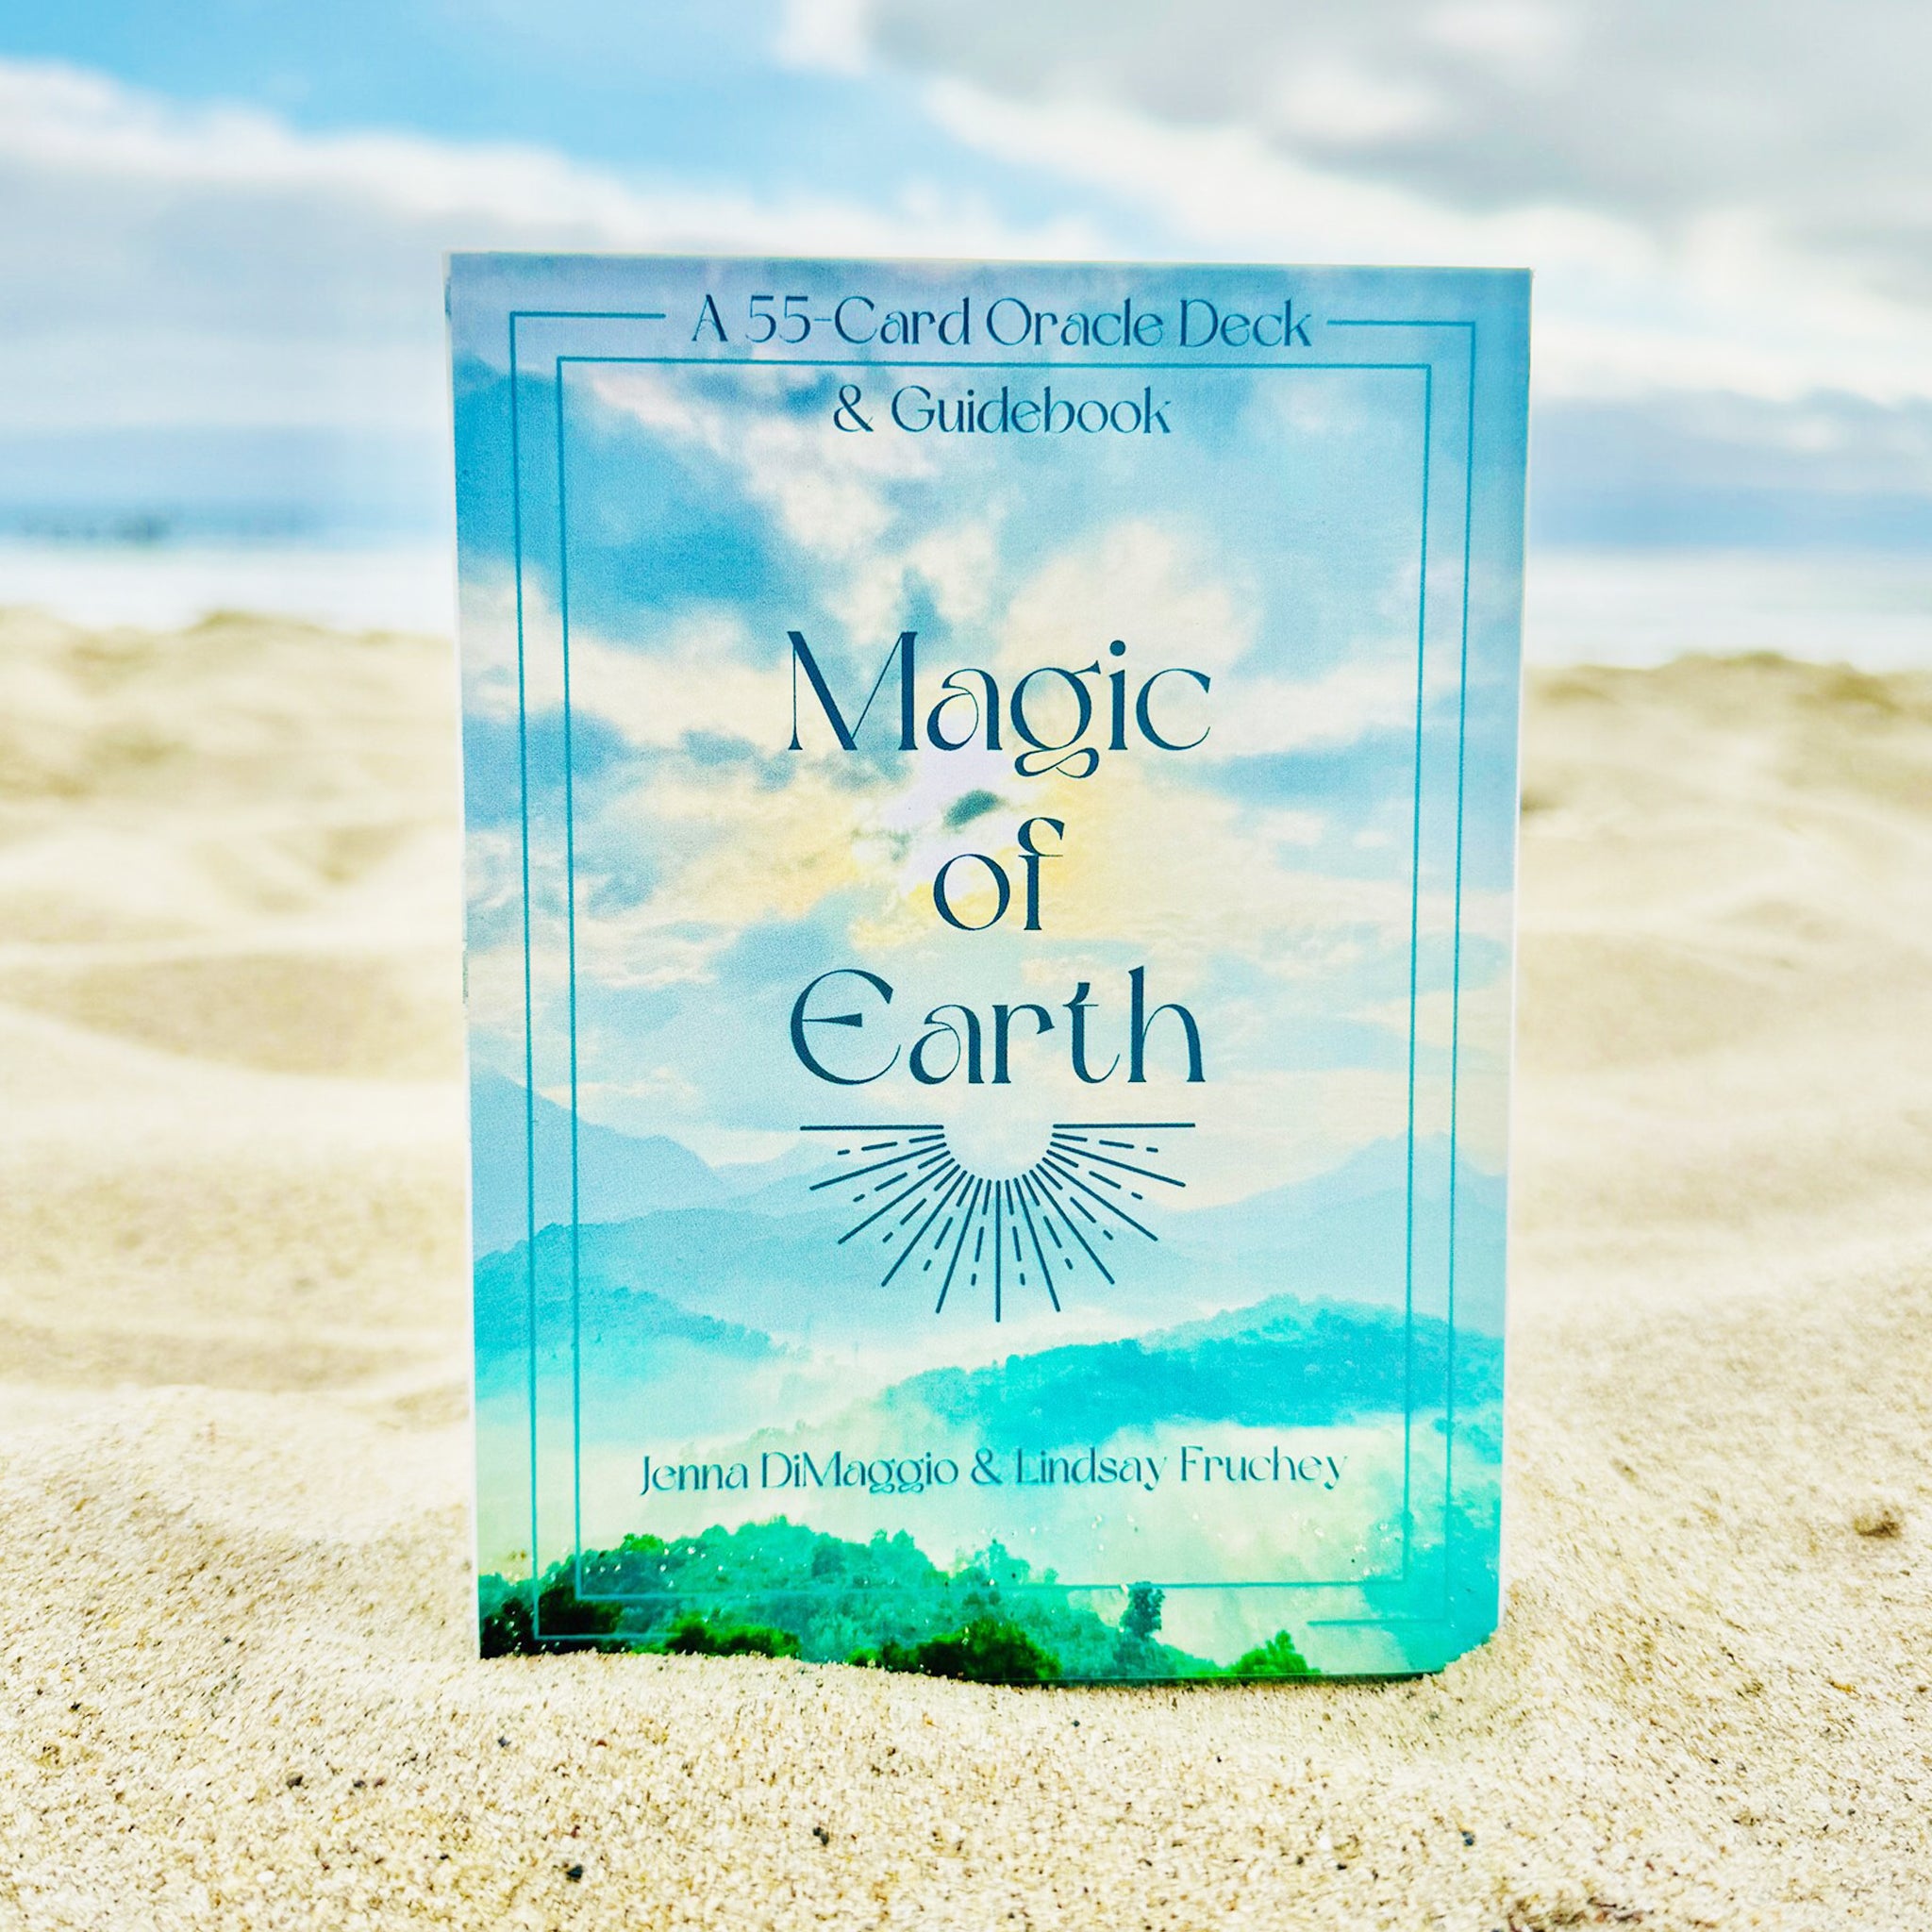 A deck of cards with a box cover of the sky and landscape and text that reads, "55 Card Oracle Deck & Guidebook Magic of Earth". 